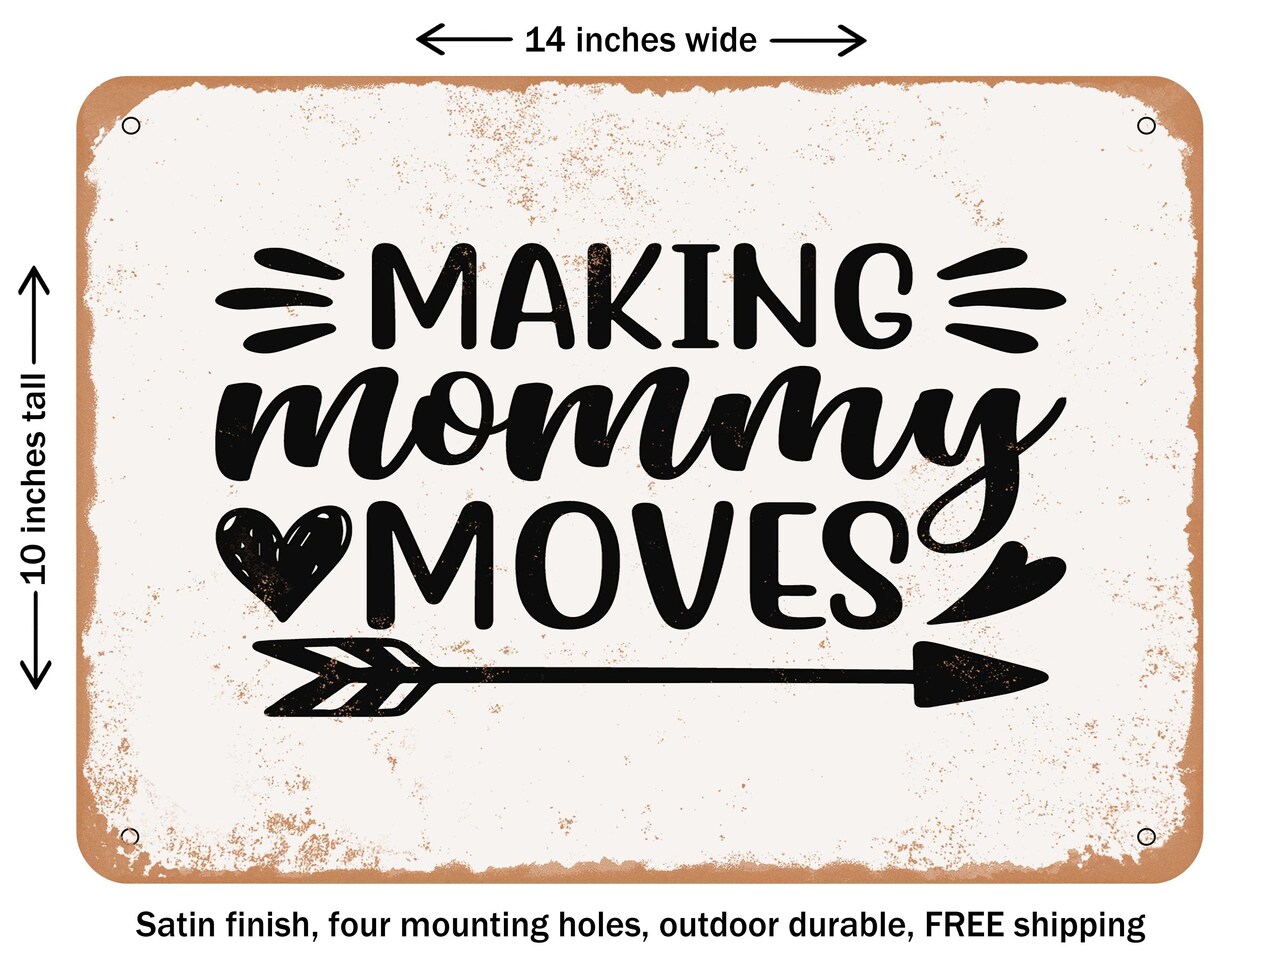 DECORATIVE METAL SIGN - Making Mommy Moves - Vintage Rusty Look